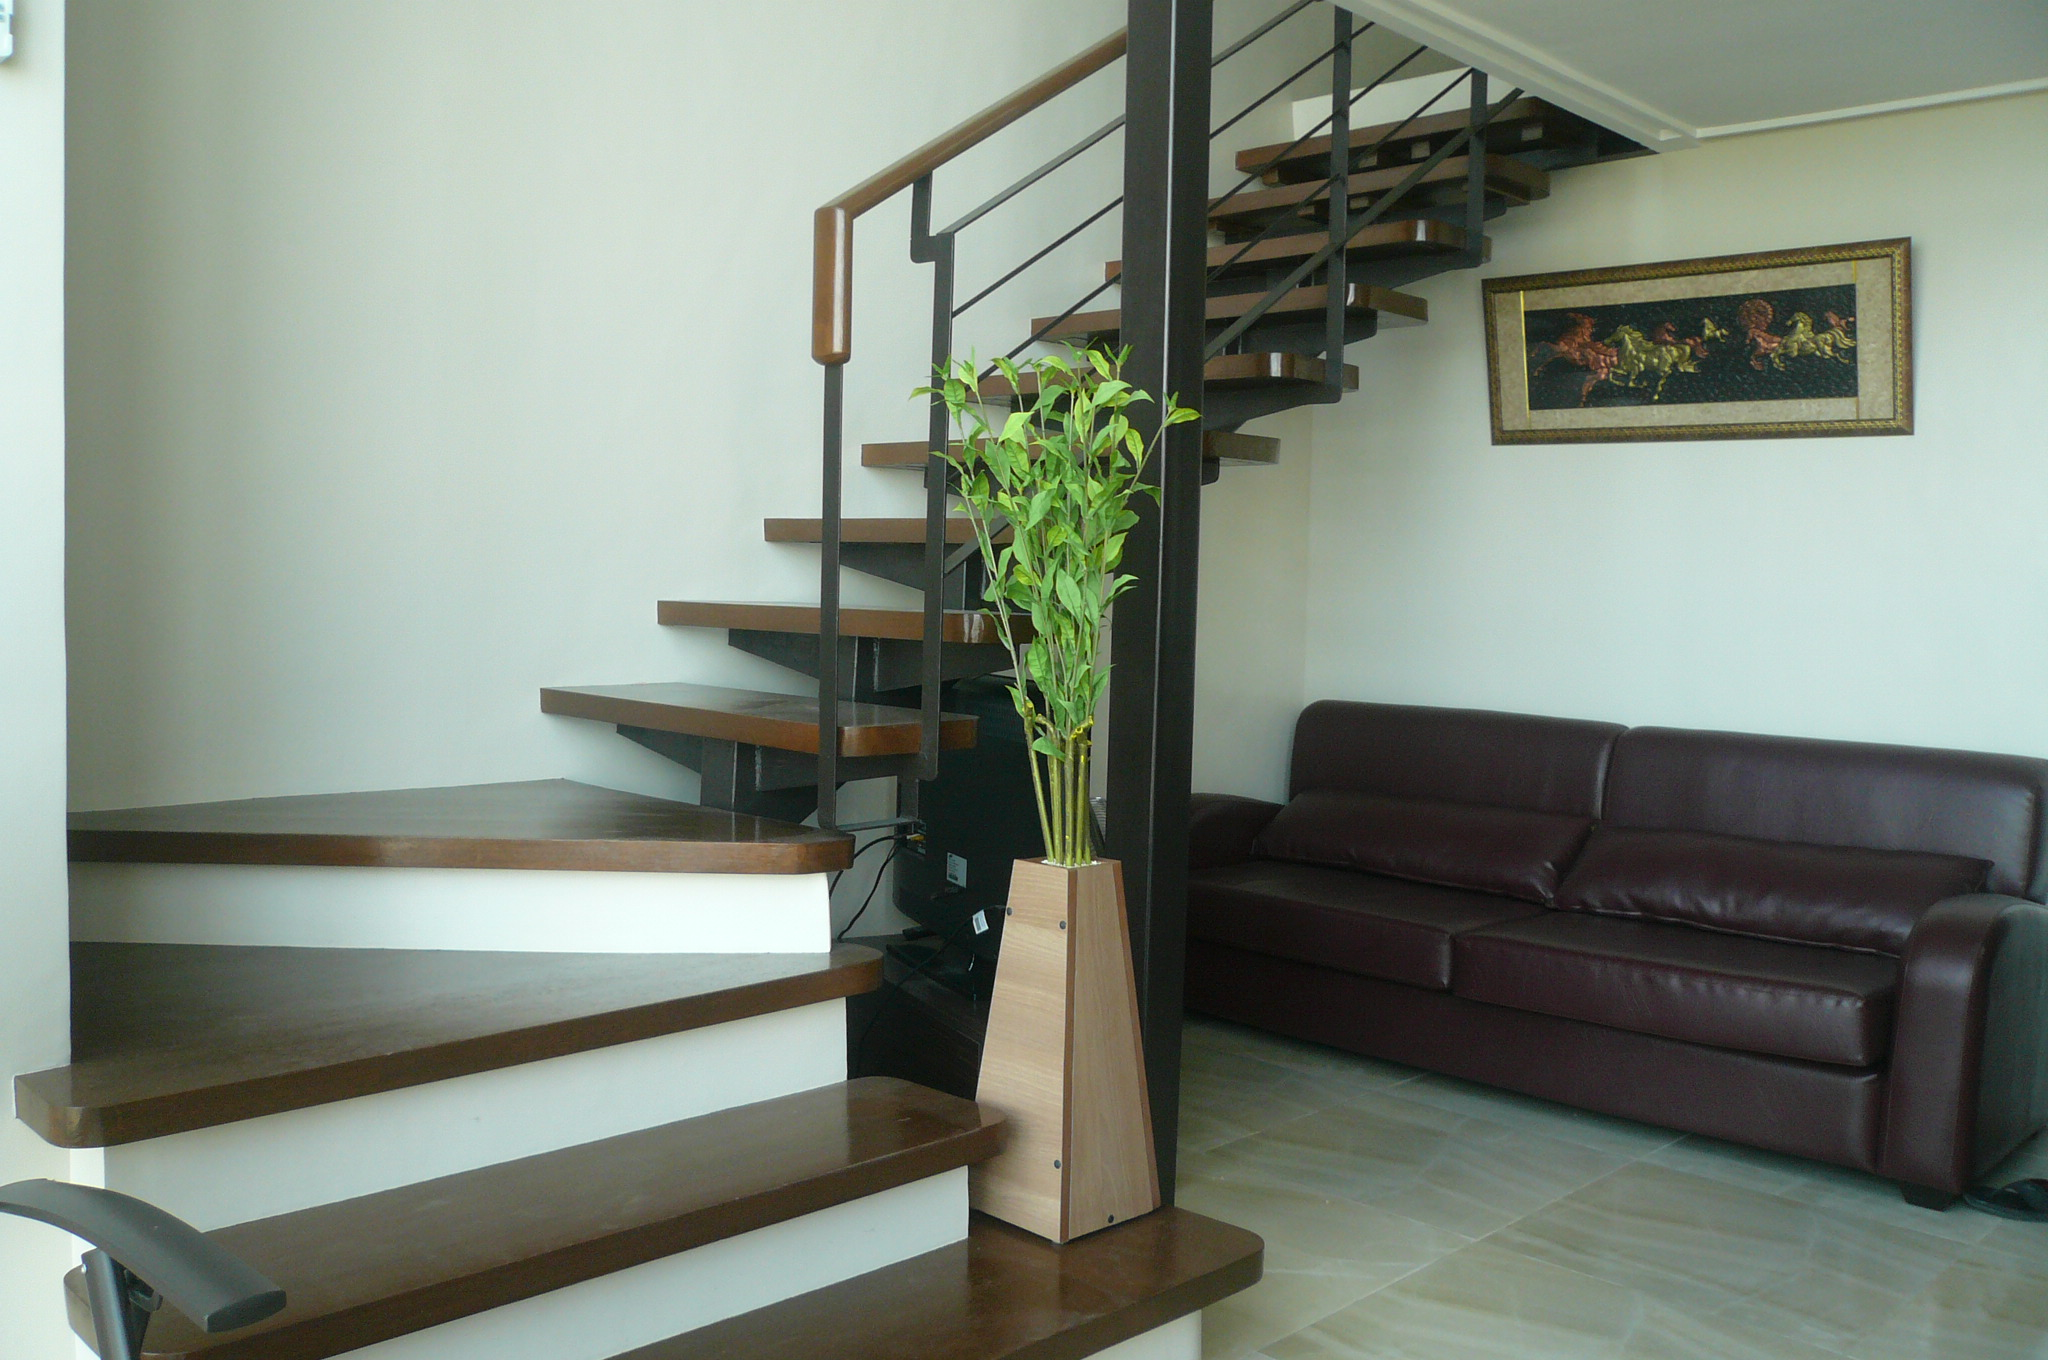 Residential Condo with Loft at the top level of ULTIMA RESIDENCES, Uptown Cebu City.